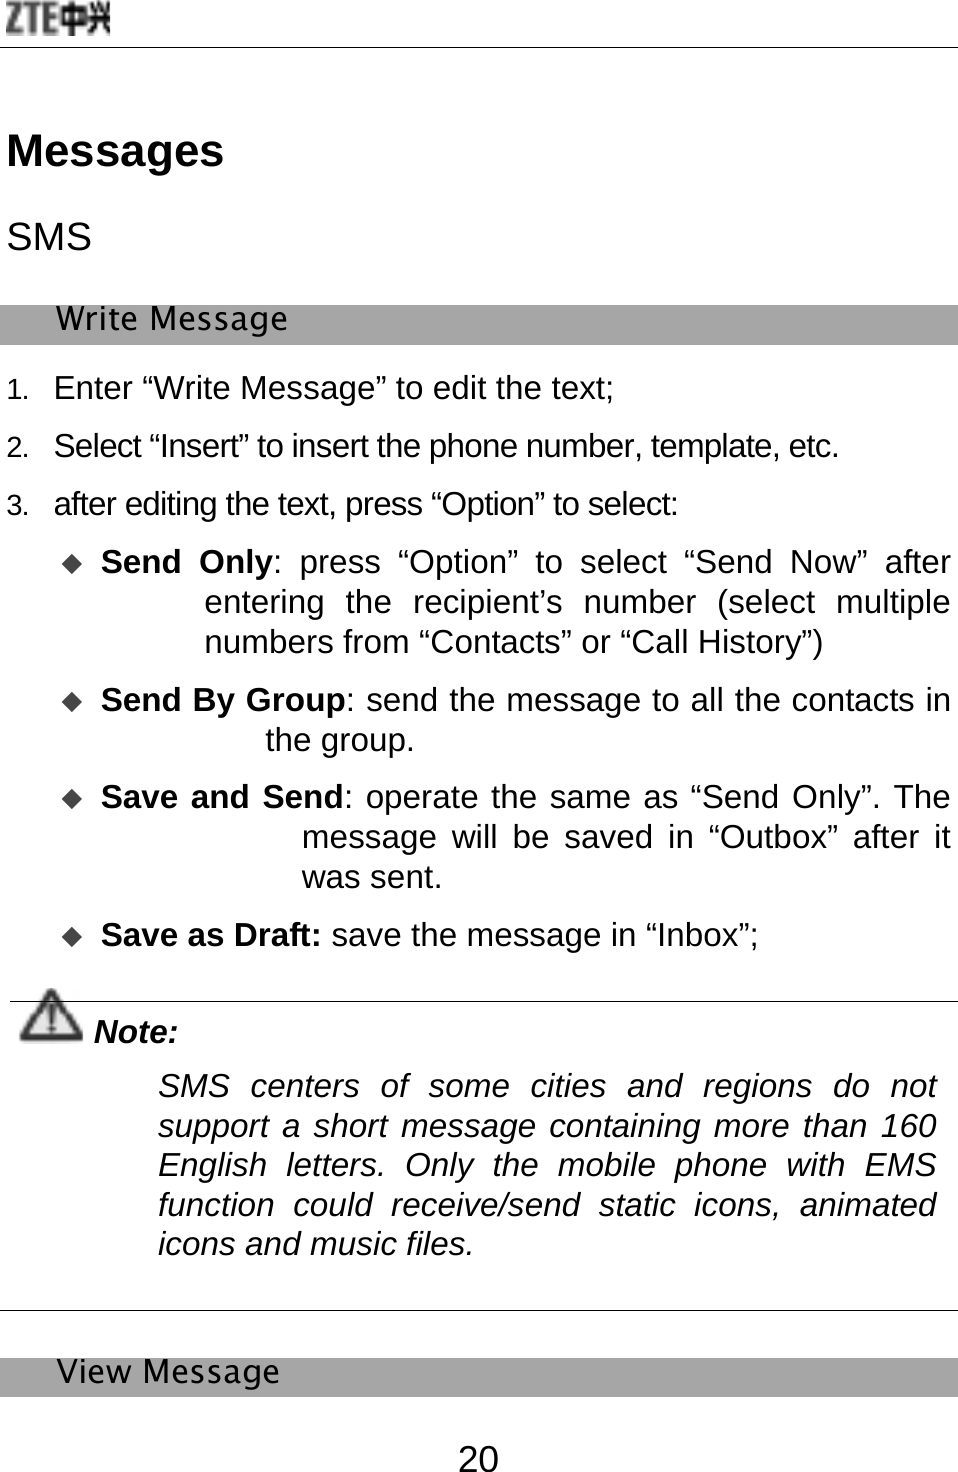  20 Messages SMS Write Message 1.  Enter “Write Message” to edit the text; 2.  Select “Insert” to insert the phone number, template, etc.   3.  after editing the text, press “Option” to select:    Send Only: press “Option” to select “Send Now” after entering the recipient’s number (select multiple numbers from “Contacts” or “Call History”)    Send By Group: send the message to all the contacts in the group.    Save and Send: operate the same as “Send Only”. The message will be saved in “Outbox” after it was sent.  Save as Draft: save the message in “Inbox”;  Note: SMS centers of some cities and regions do not support a short message containing more than 160 English letters. Only the mobile phone with EMS function could receive/send static icons, animated icons and music files.    View Message 